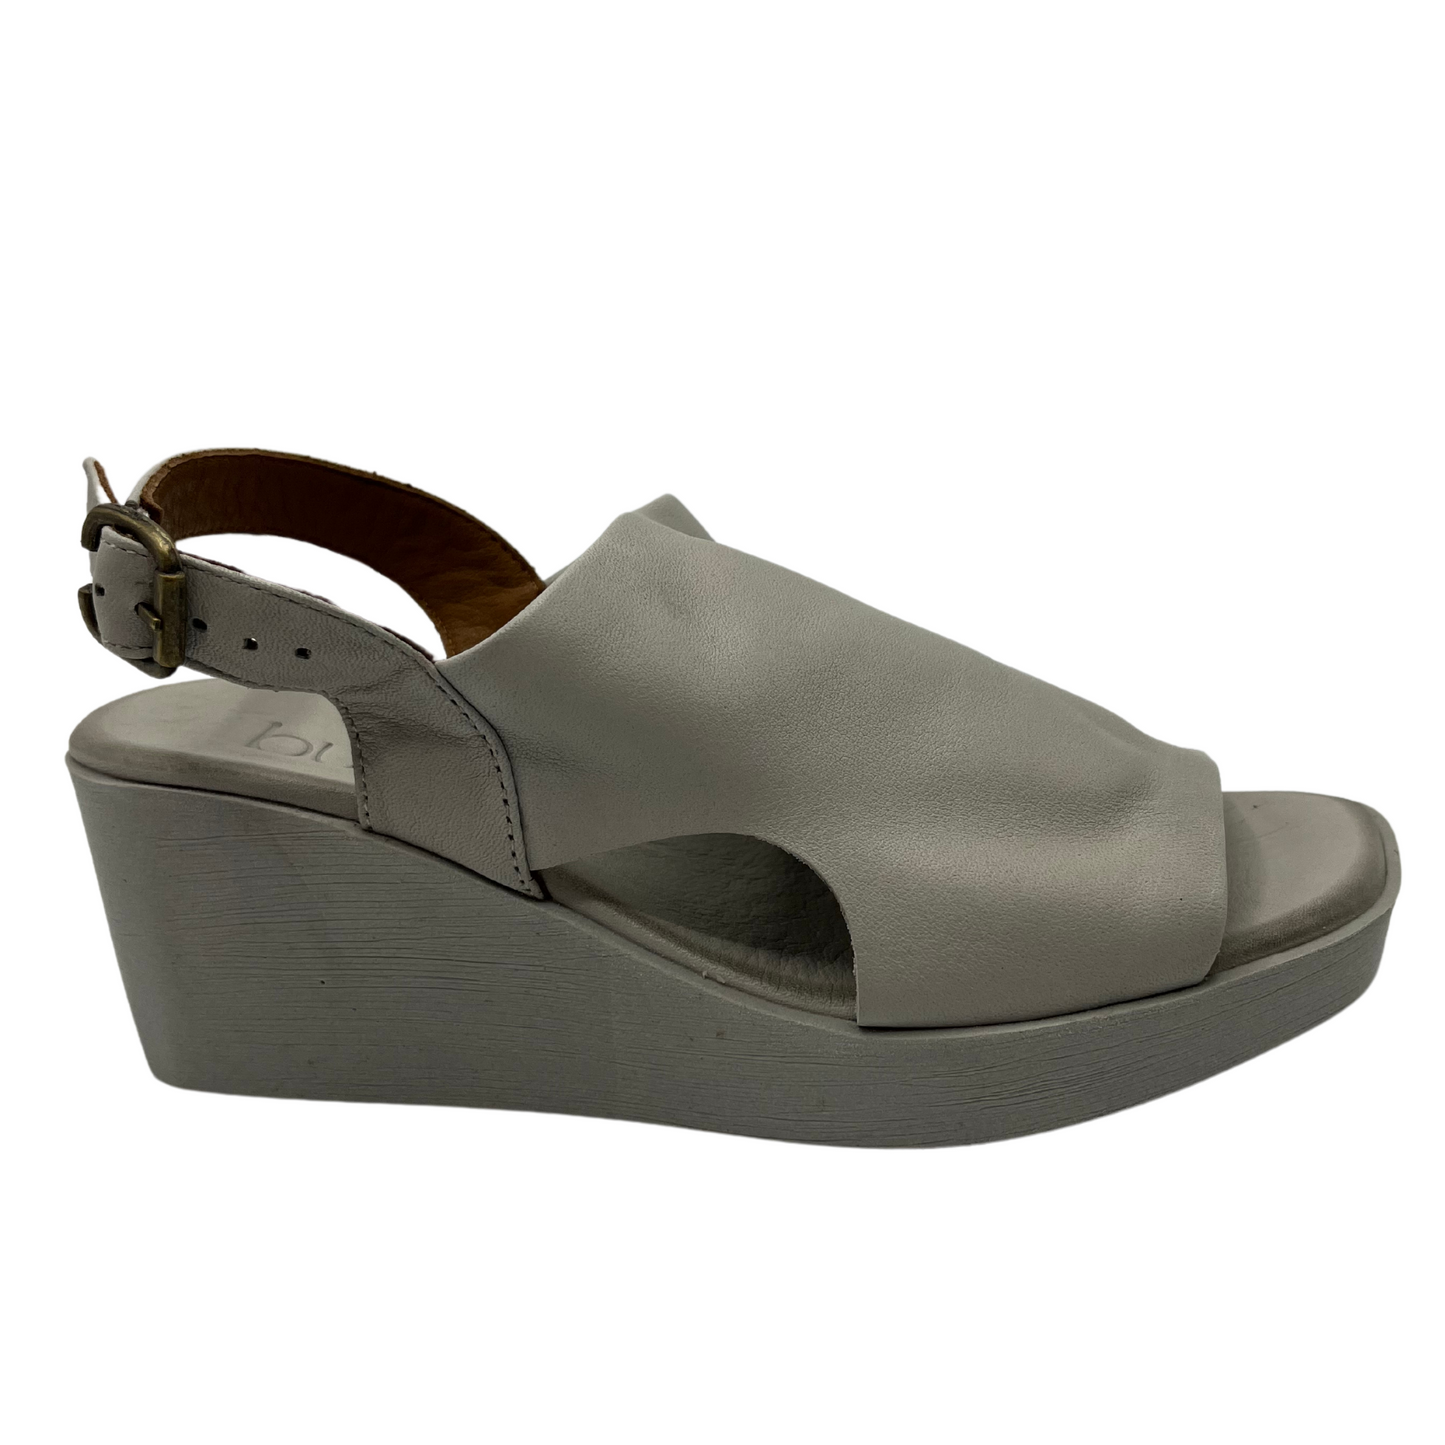 Right facing view of leather sandal with square toe and slingback buckle strap